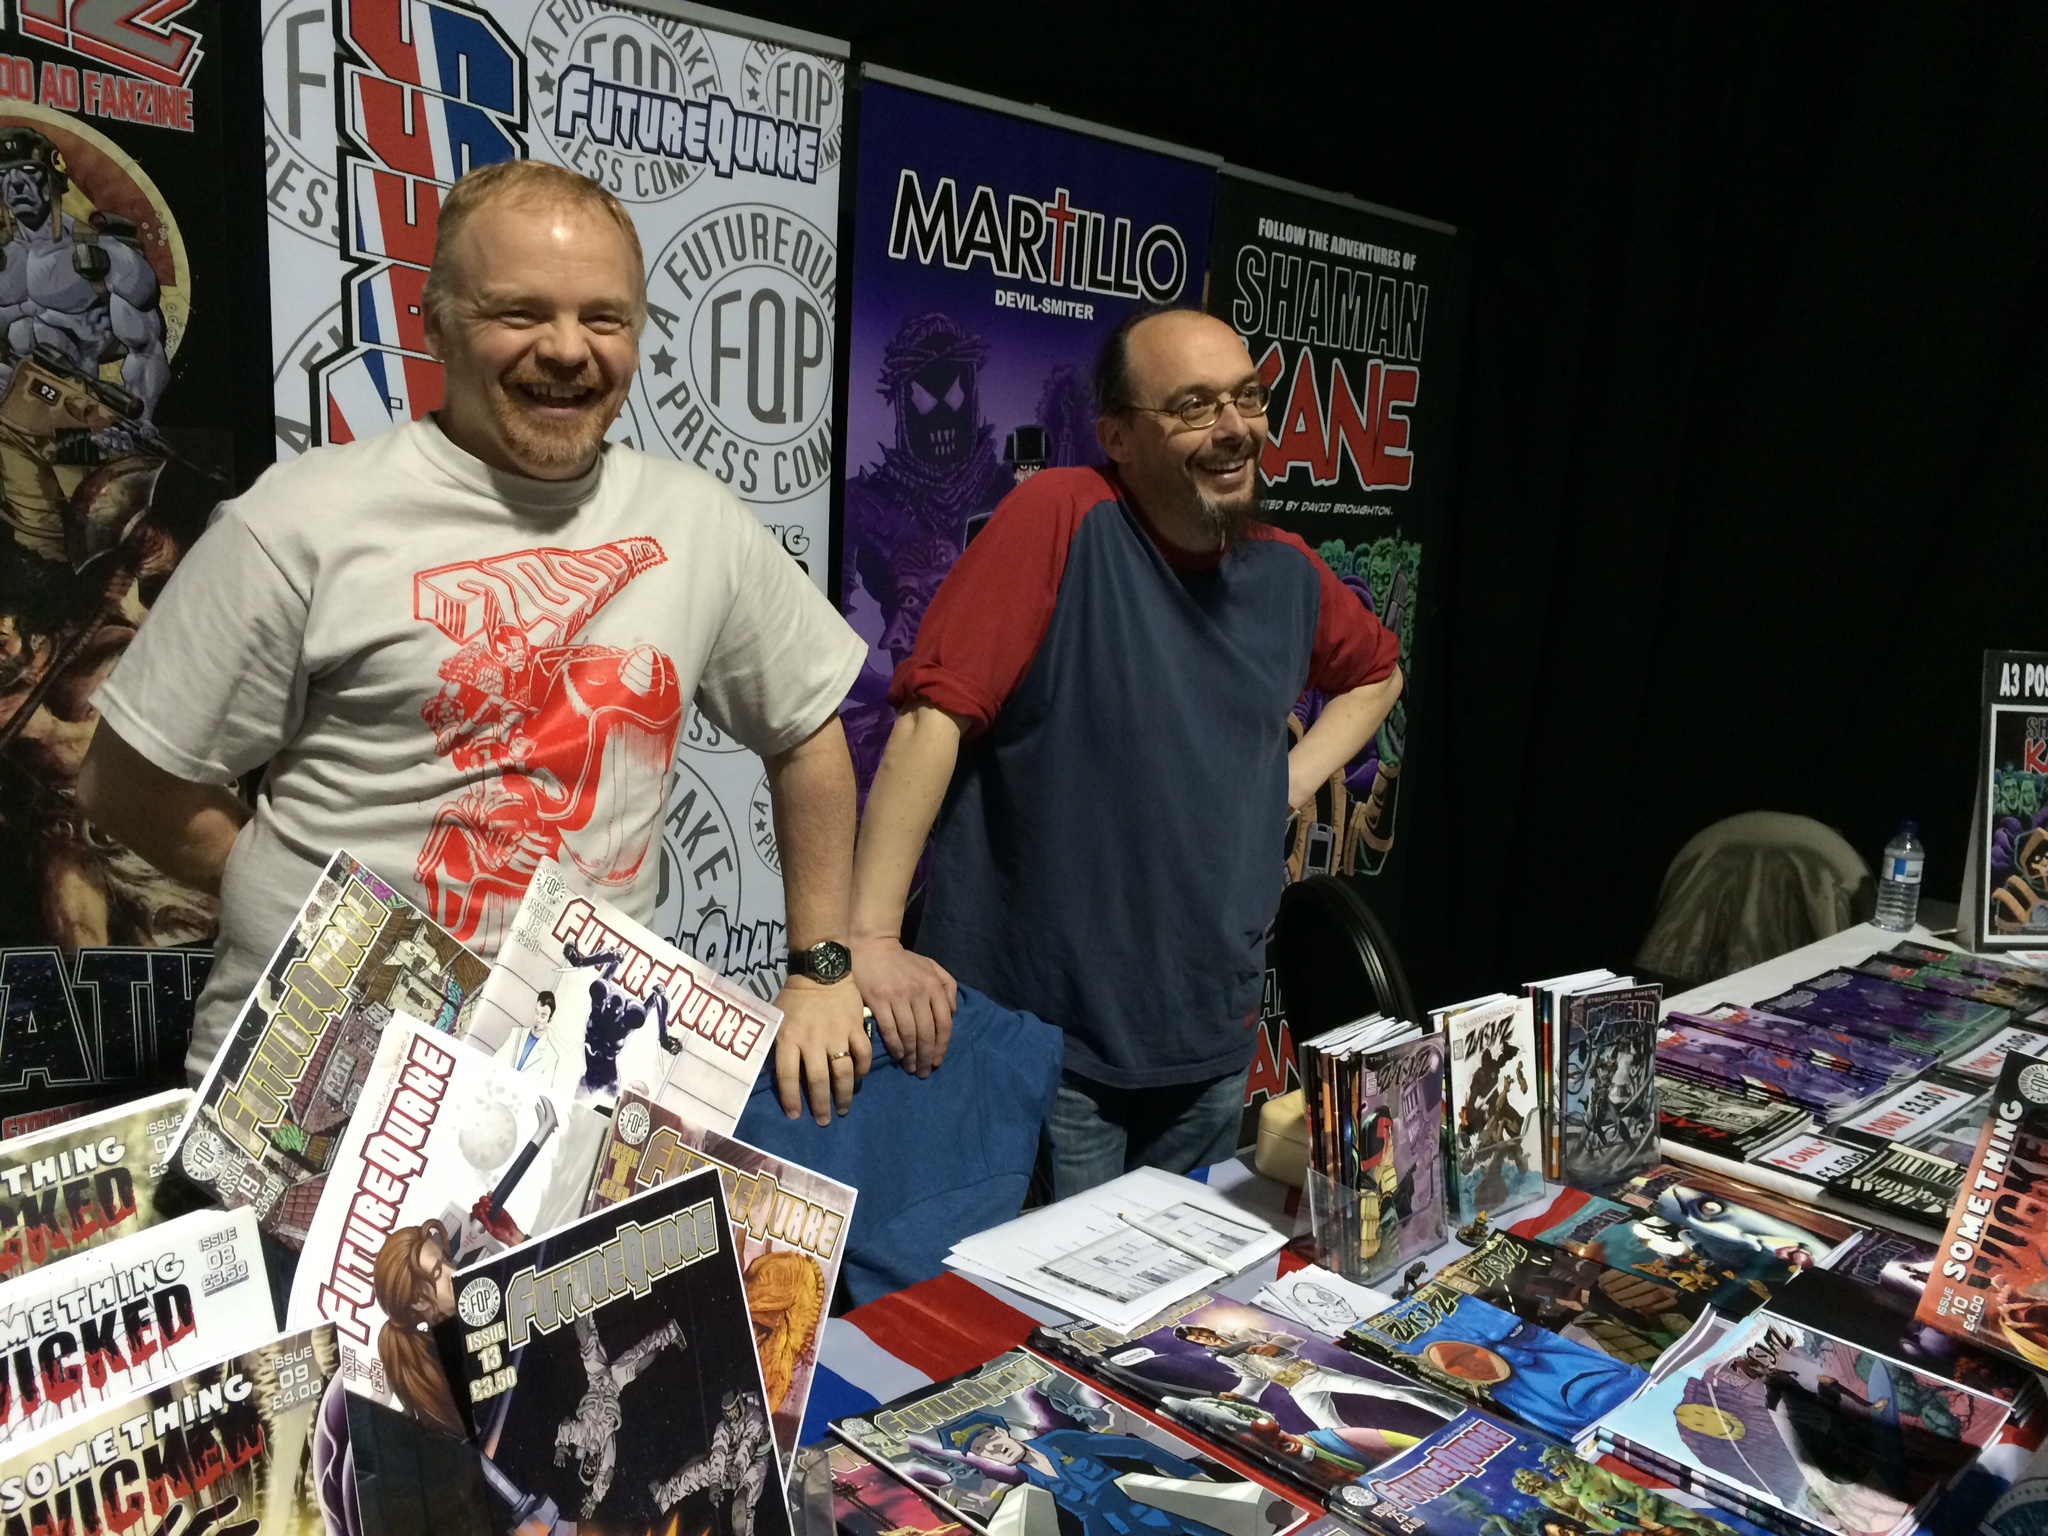 Futurequake Press were at Thought Bubble in force. Pictured are Dave Evans and Richmond Clements. Photo: Antony Esmond.